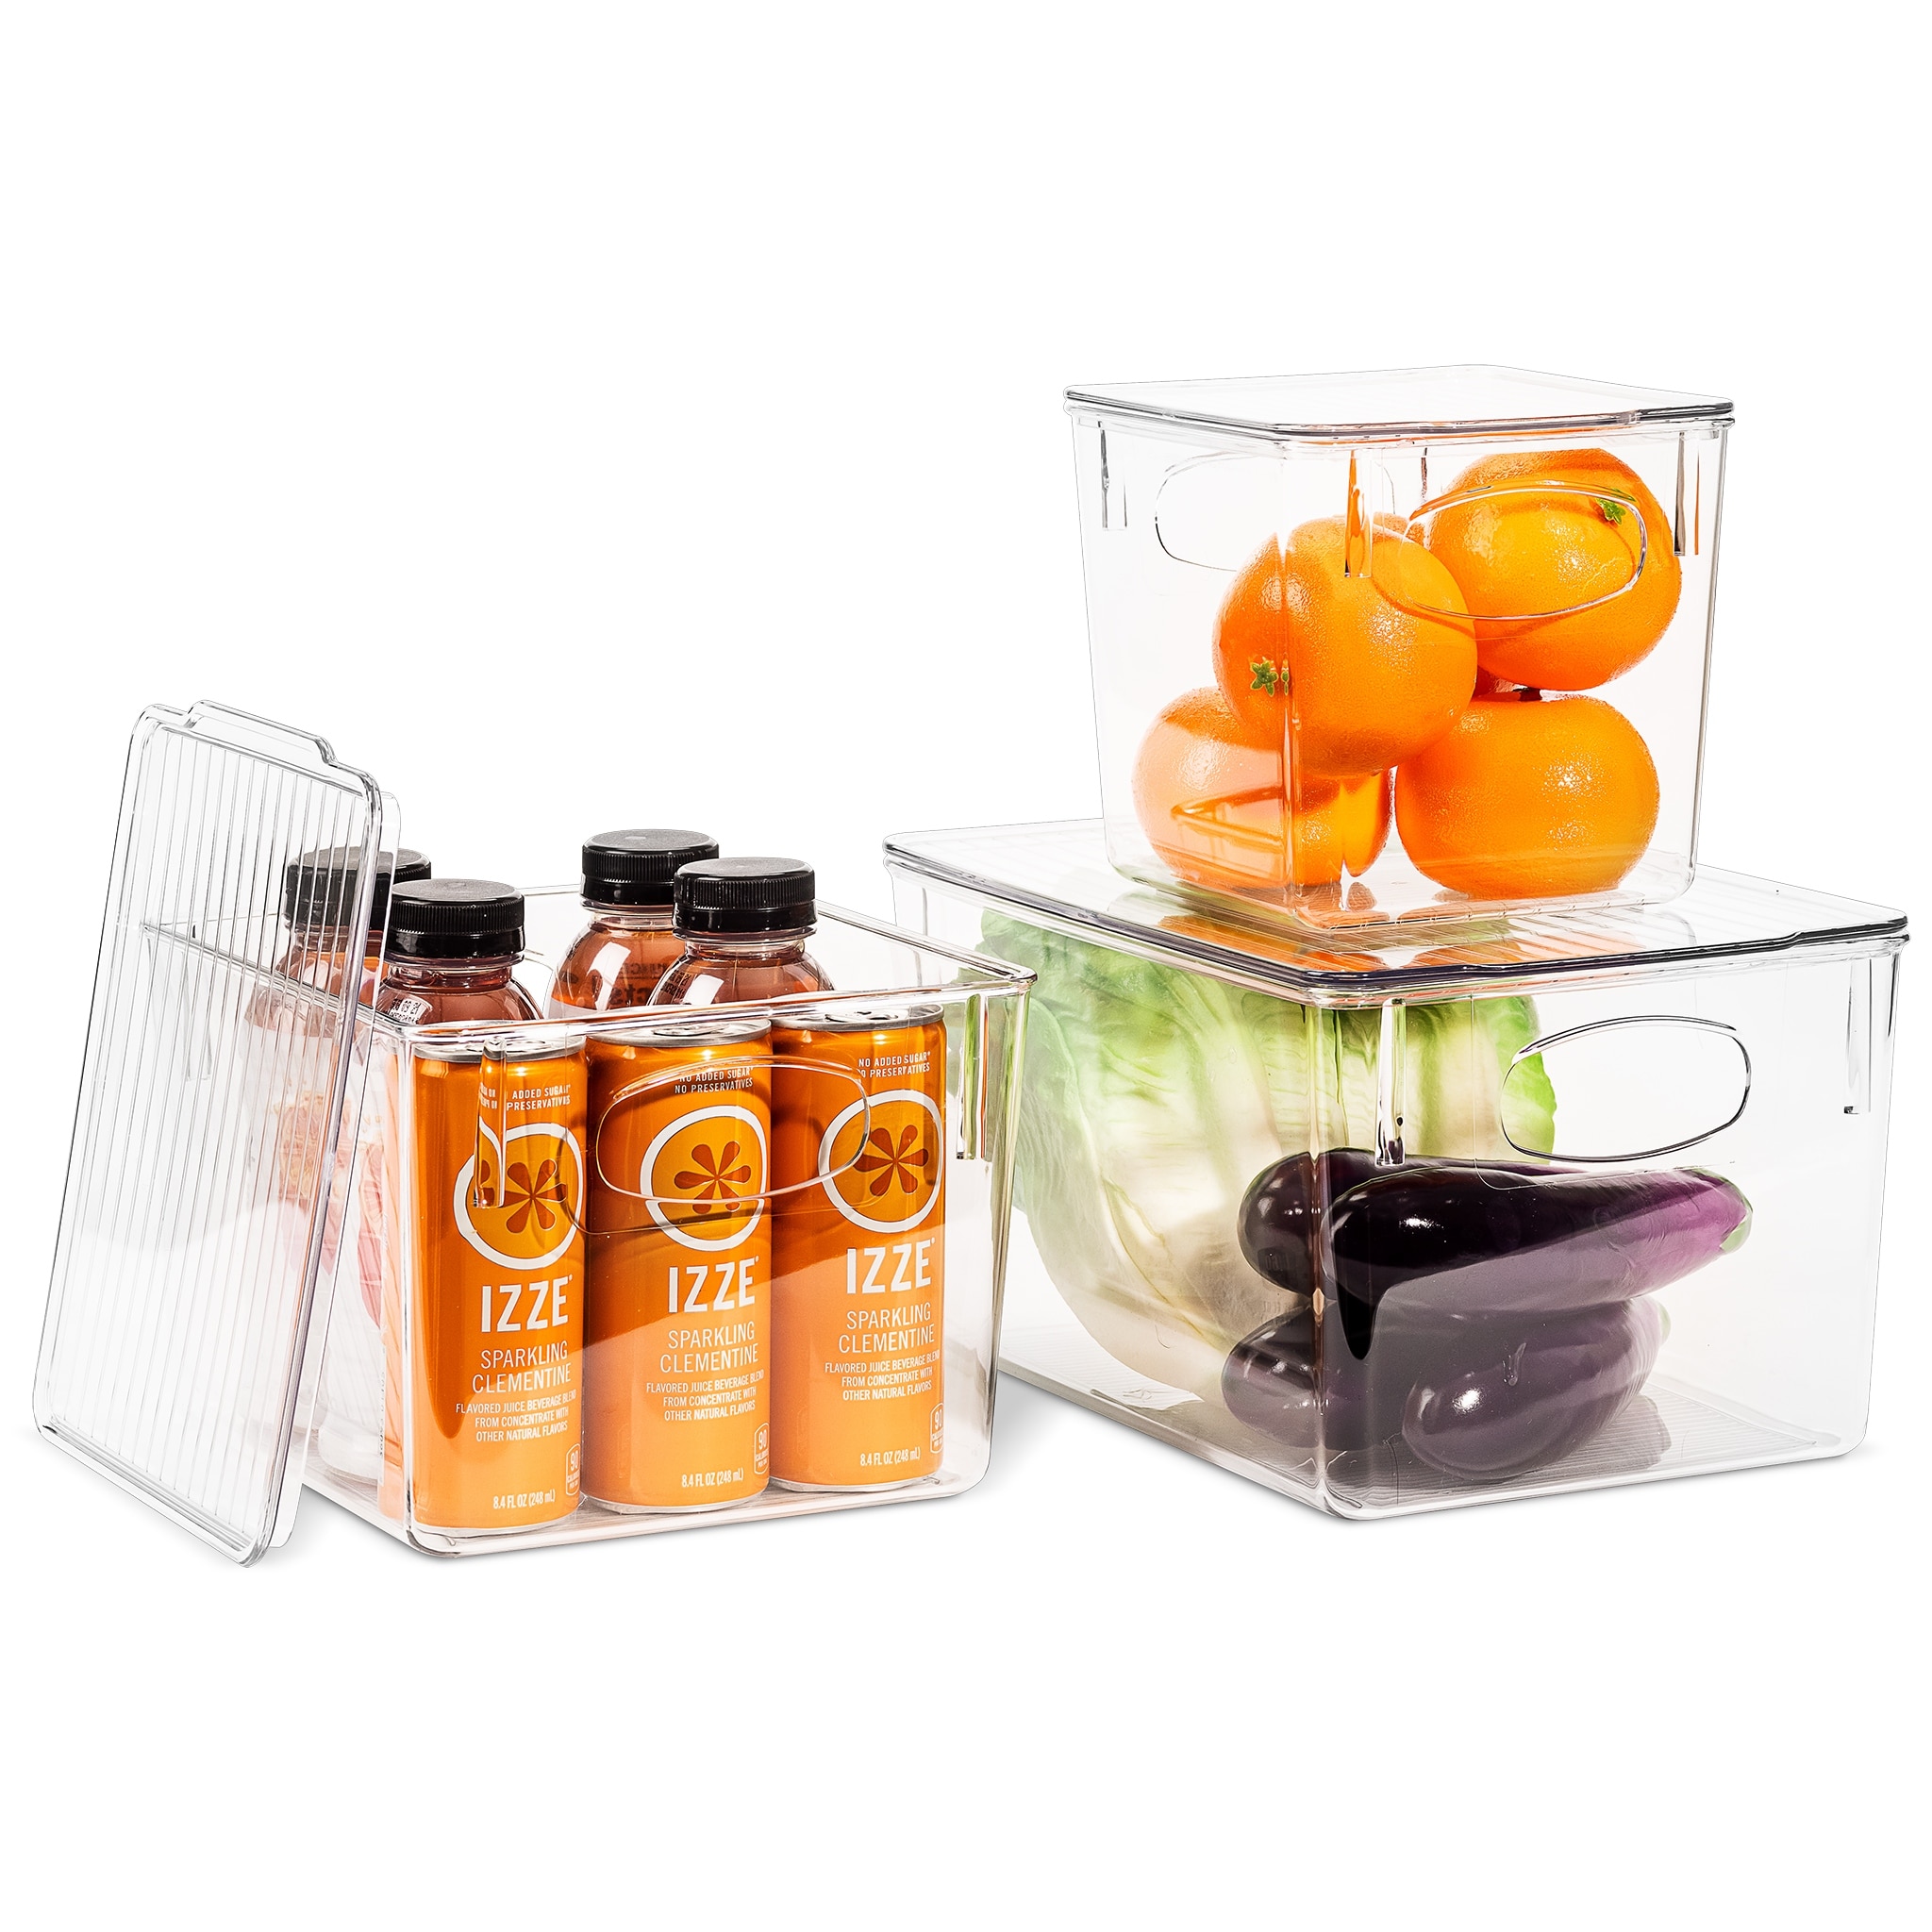 Sorbus Organizer Bins, with Lids & Removable Compartments, Kitchen Pantry Organization Storage Bins with Dividers - Clear